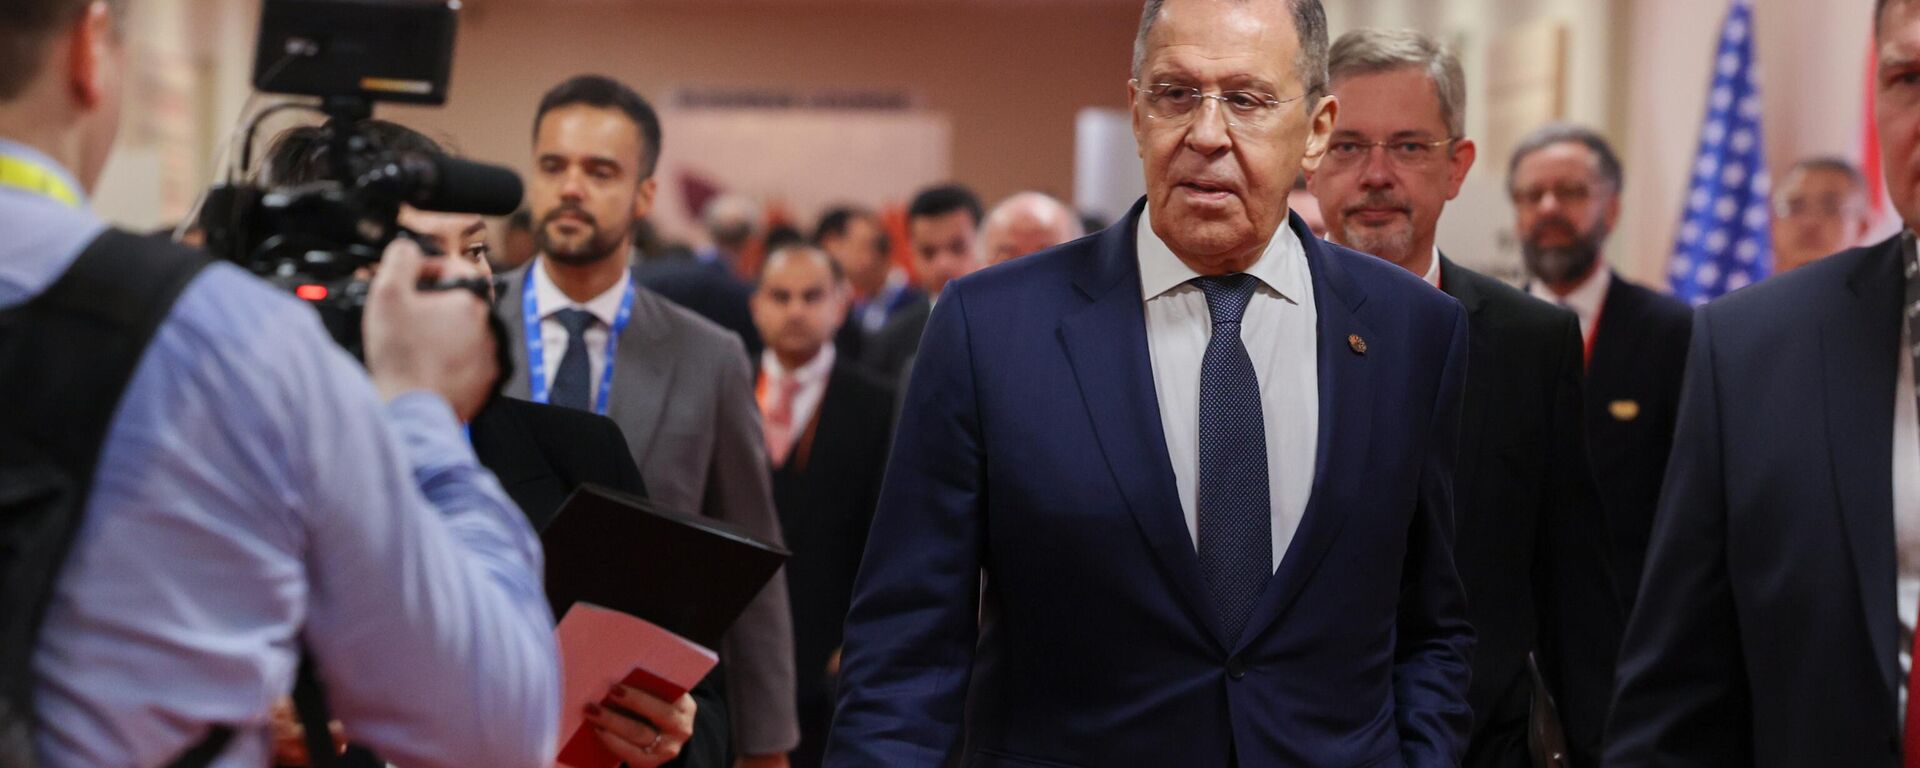 Russian Foreign Minister Sergei Lavrov at the G20 Minister's Meeting in New Delhi, India. March 2, 2023. - Sputnik International, 1920, 02.03.2023